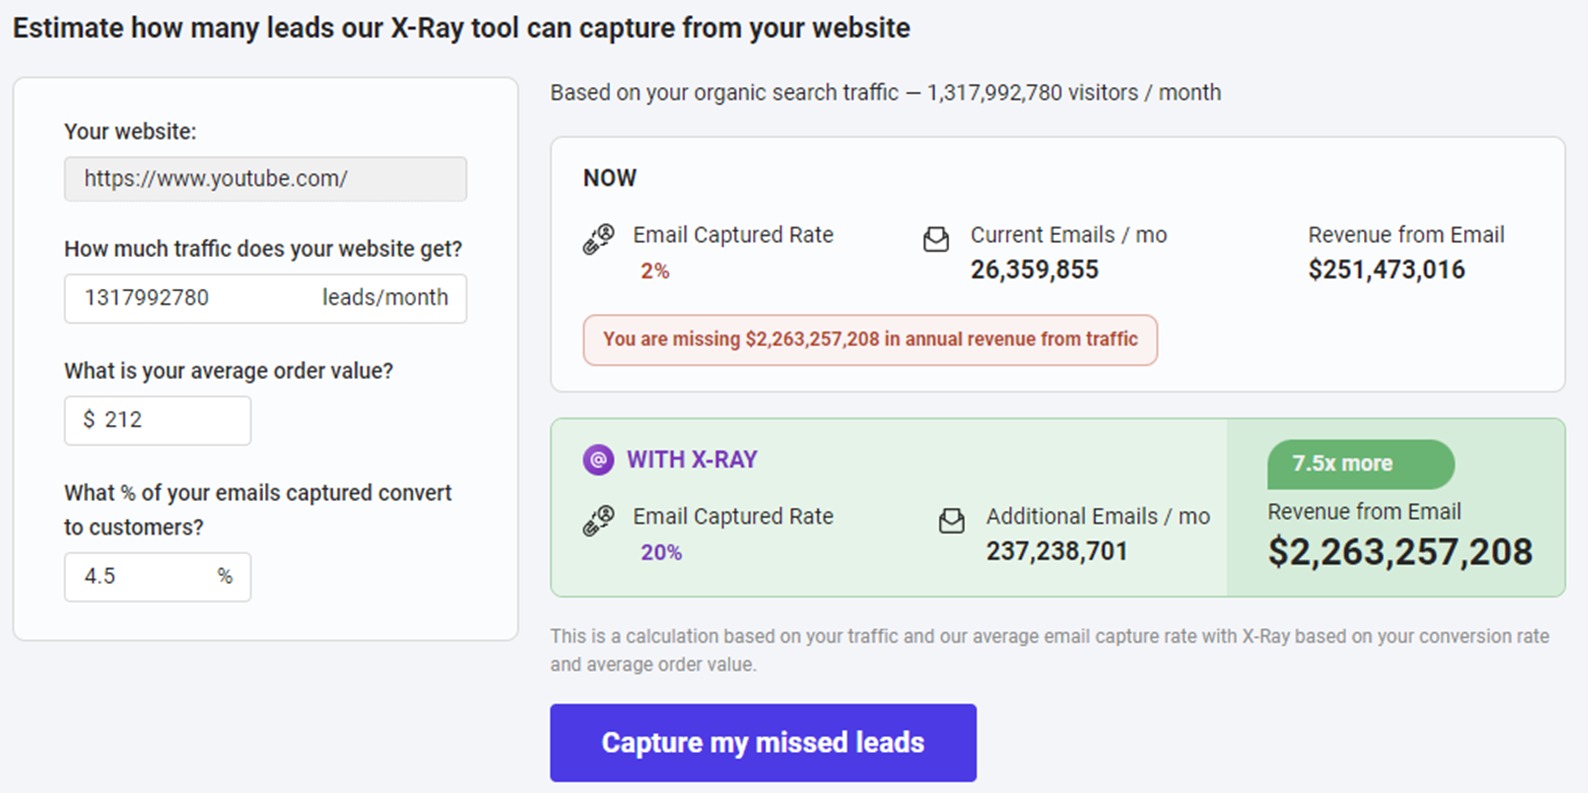 Estimated additional emails and revenue that can be gained from using the X-Ray app.